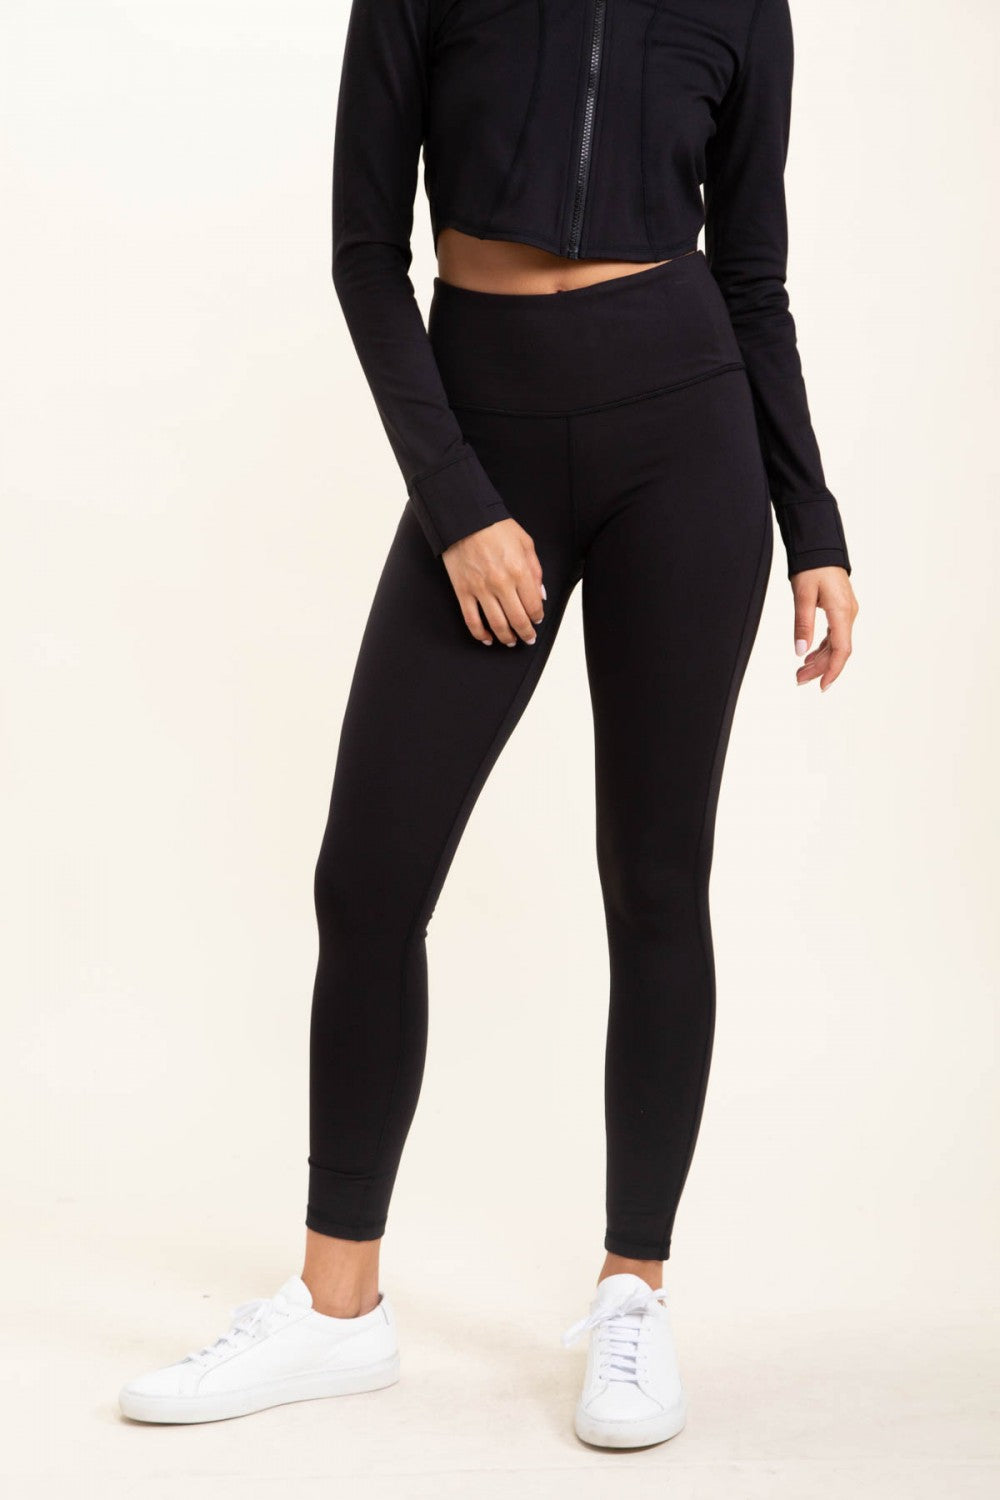 Leggings Gusset, Shop The Largest Collection